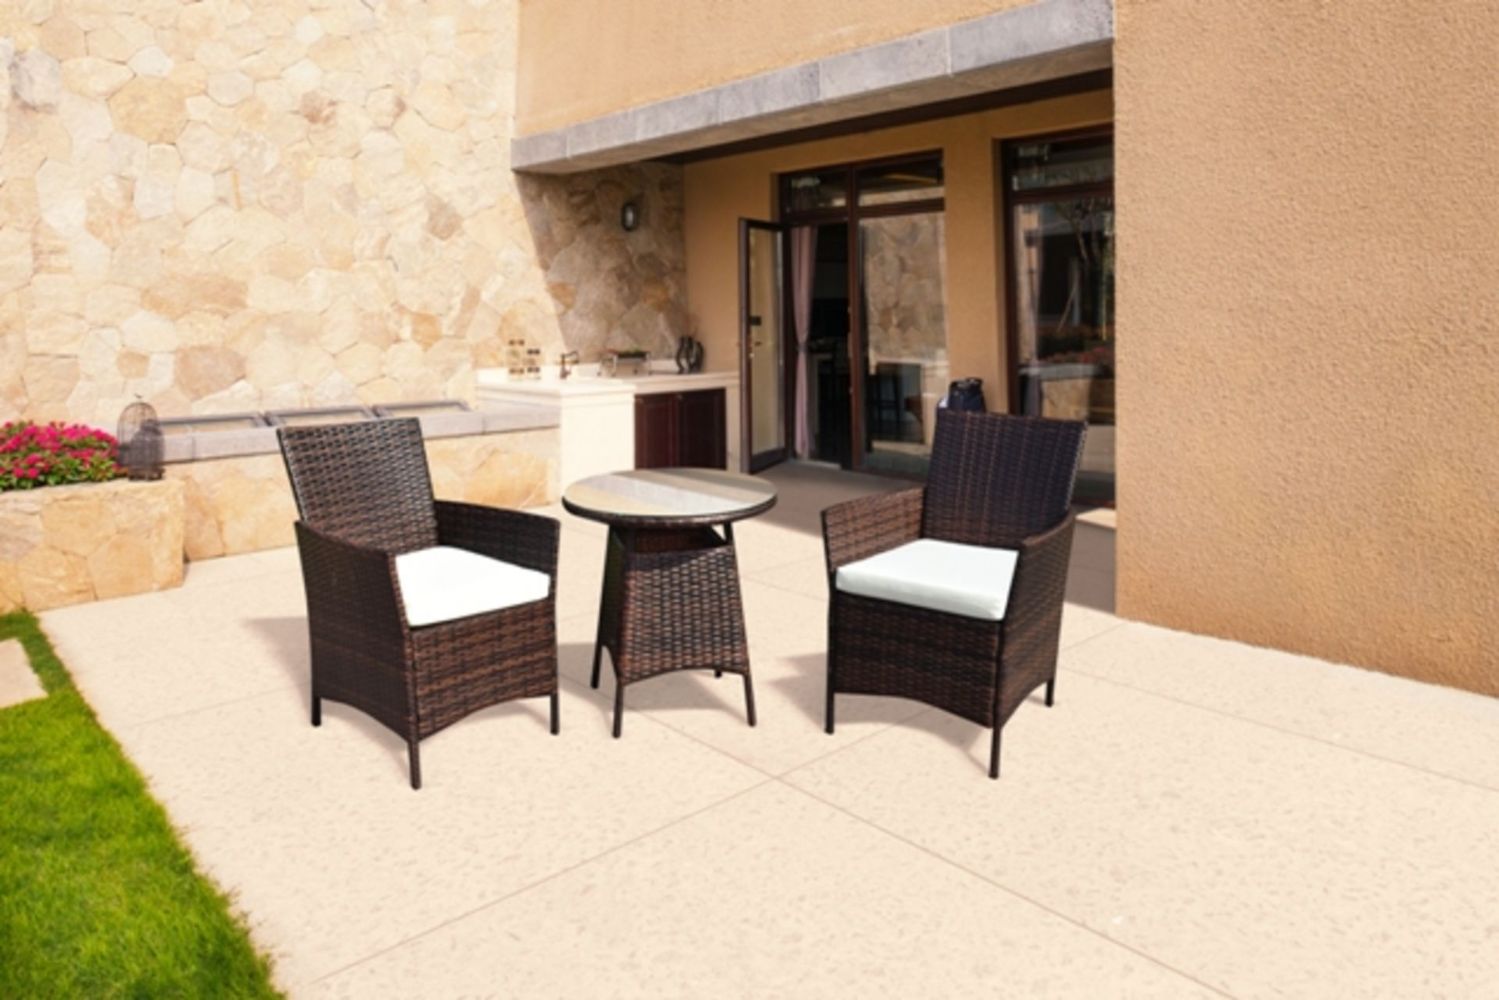 Over £50,000 Of New Rattan  2 & 6 Seater Dining Sets, Metal Garden Furniture & Gas Heaters | Sale With Clearance Prices | UK Delivery Available